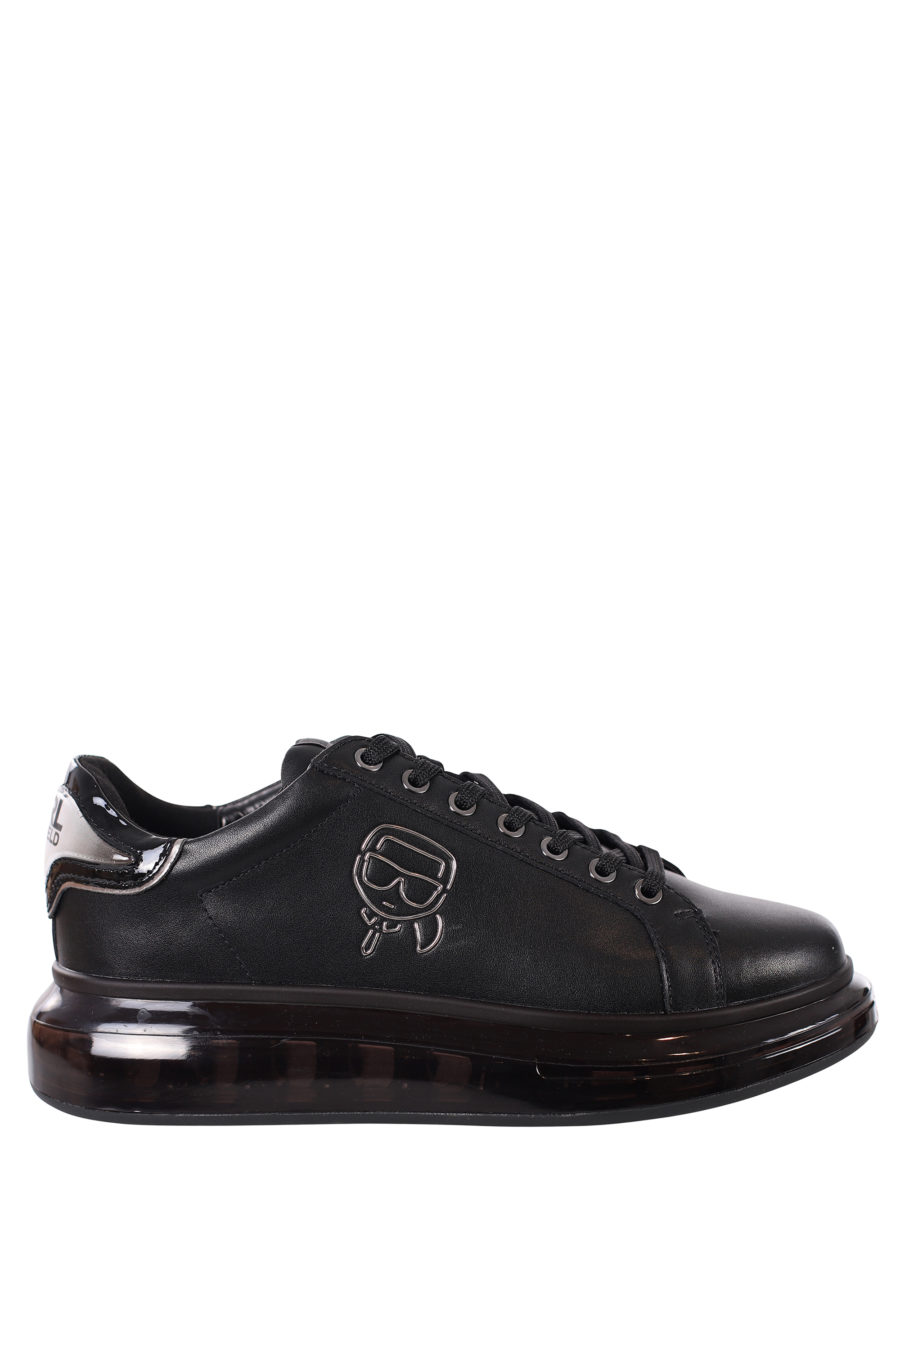 Black trainers with black logo silhouette and black sole - IMG 0413